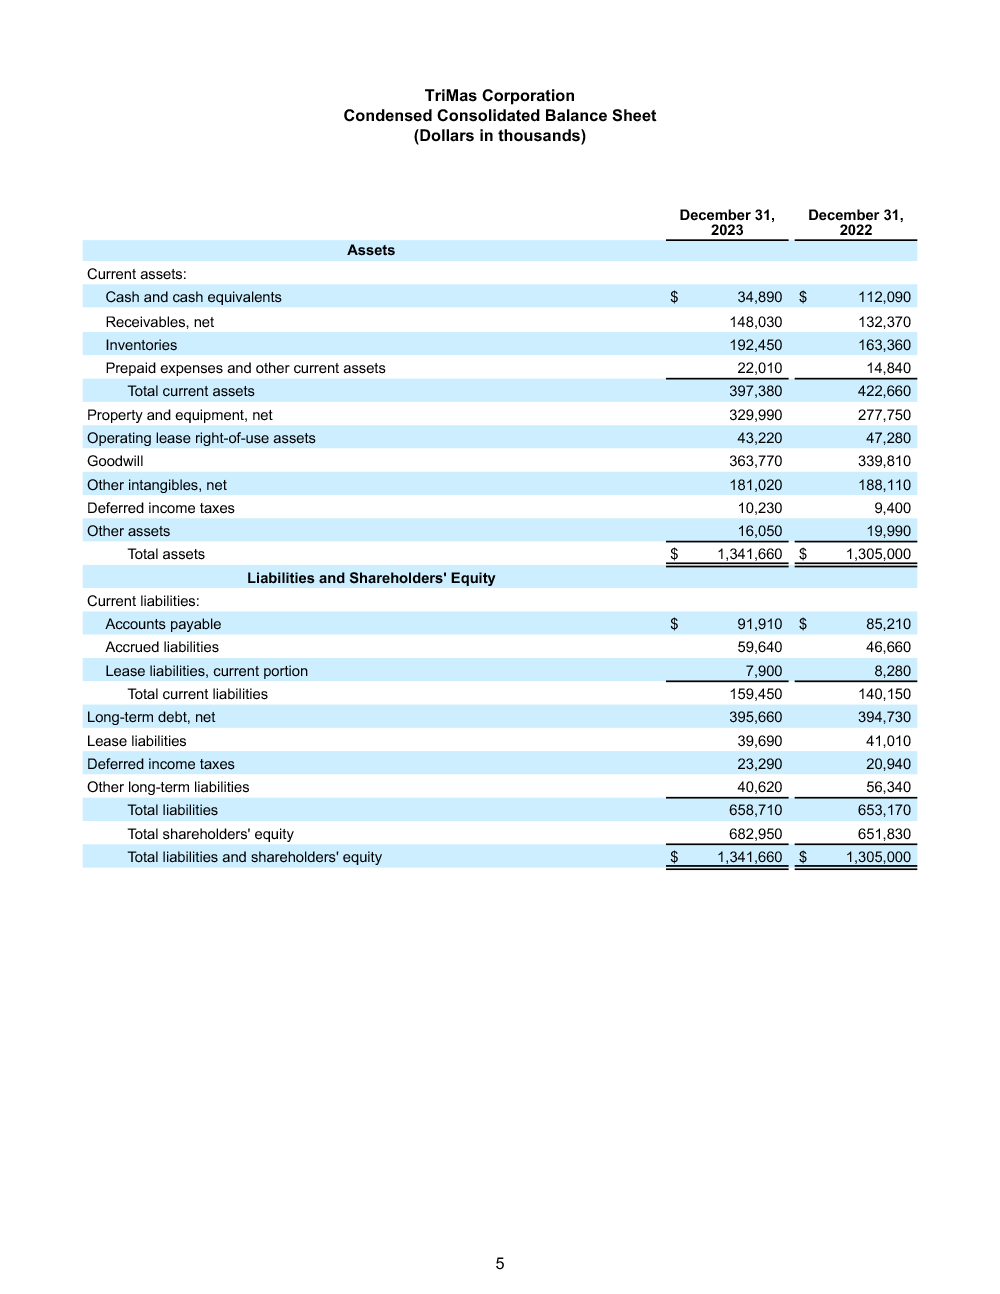 FINAL 22924 Q4 and Full Year 2023 Earnings Release 5